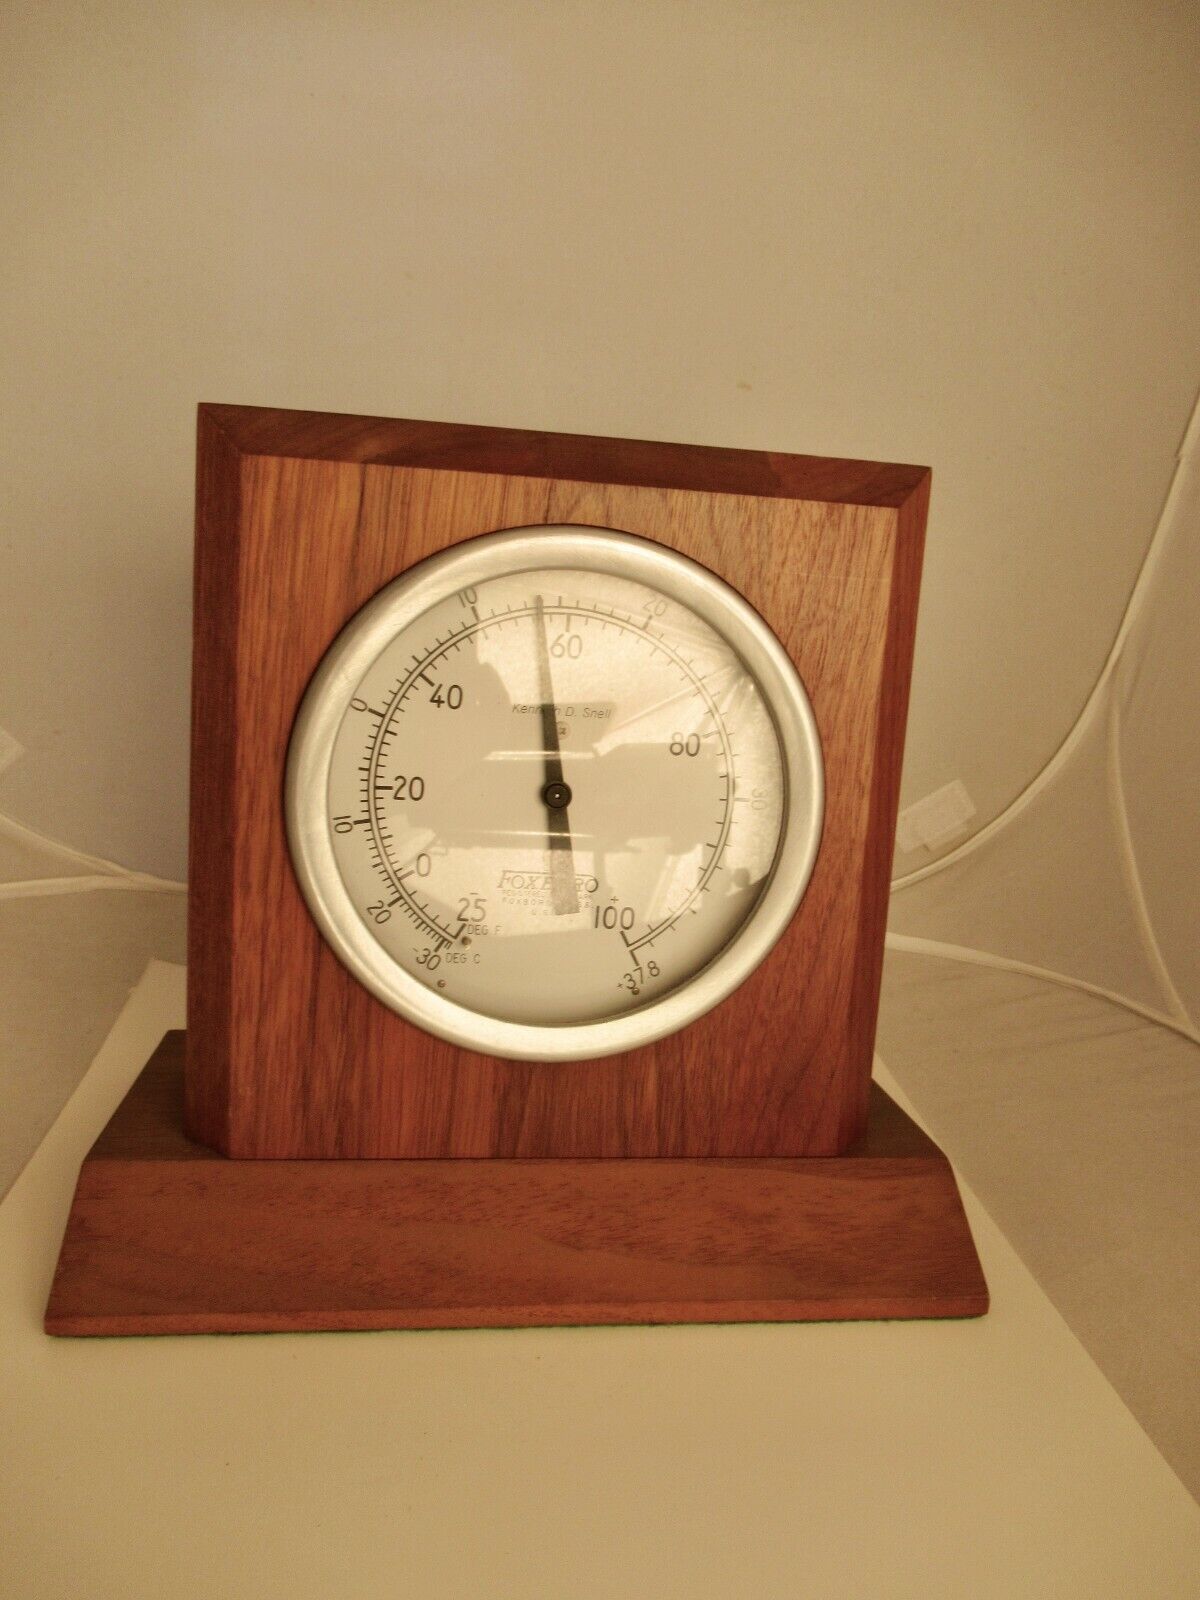 Foxboro MA 25 Year Club Indicating Thermometer wood cased MCM Fahrenheit Celsius